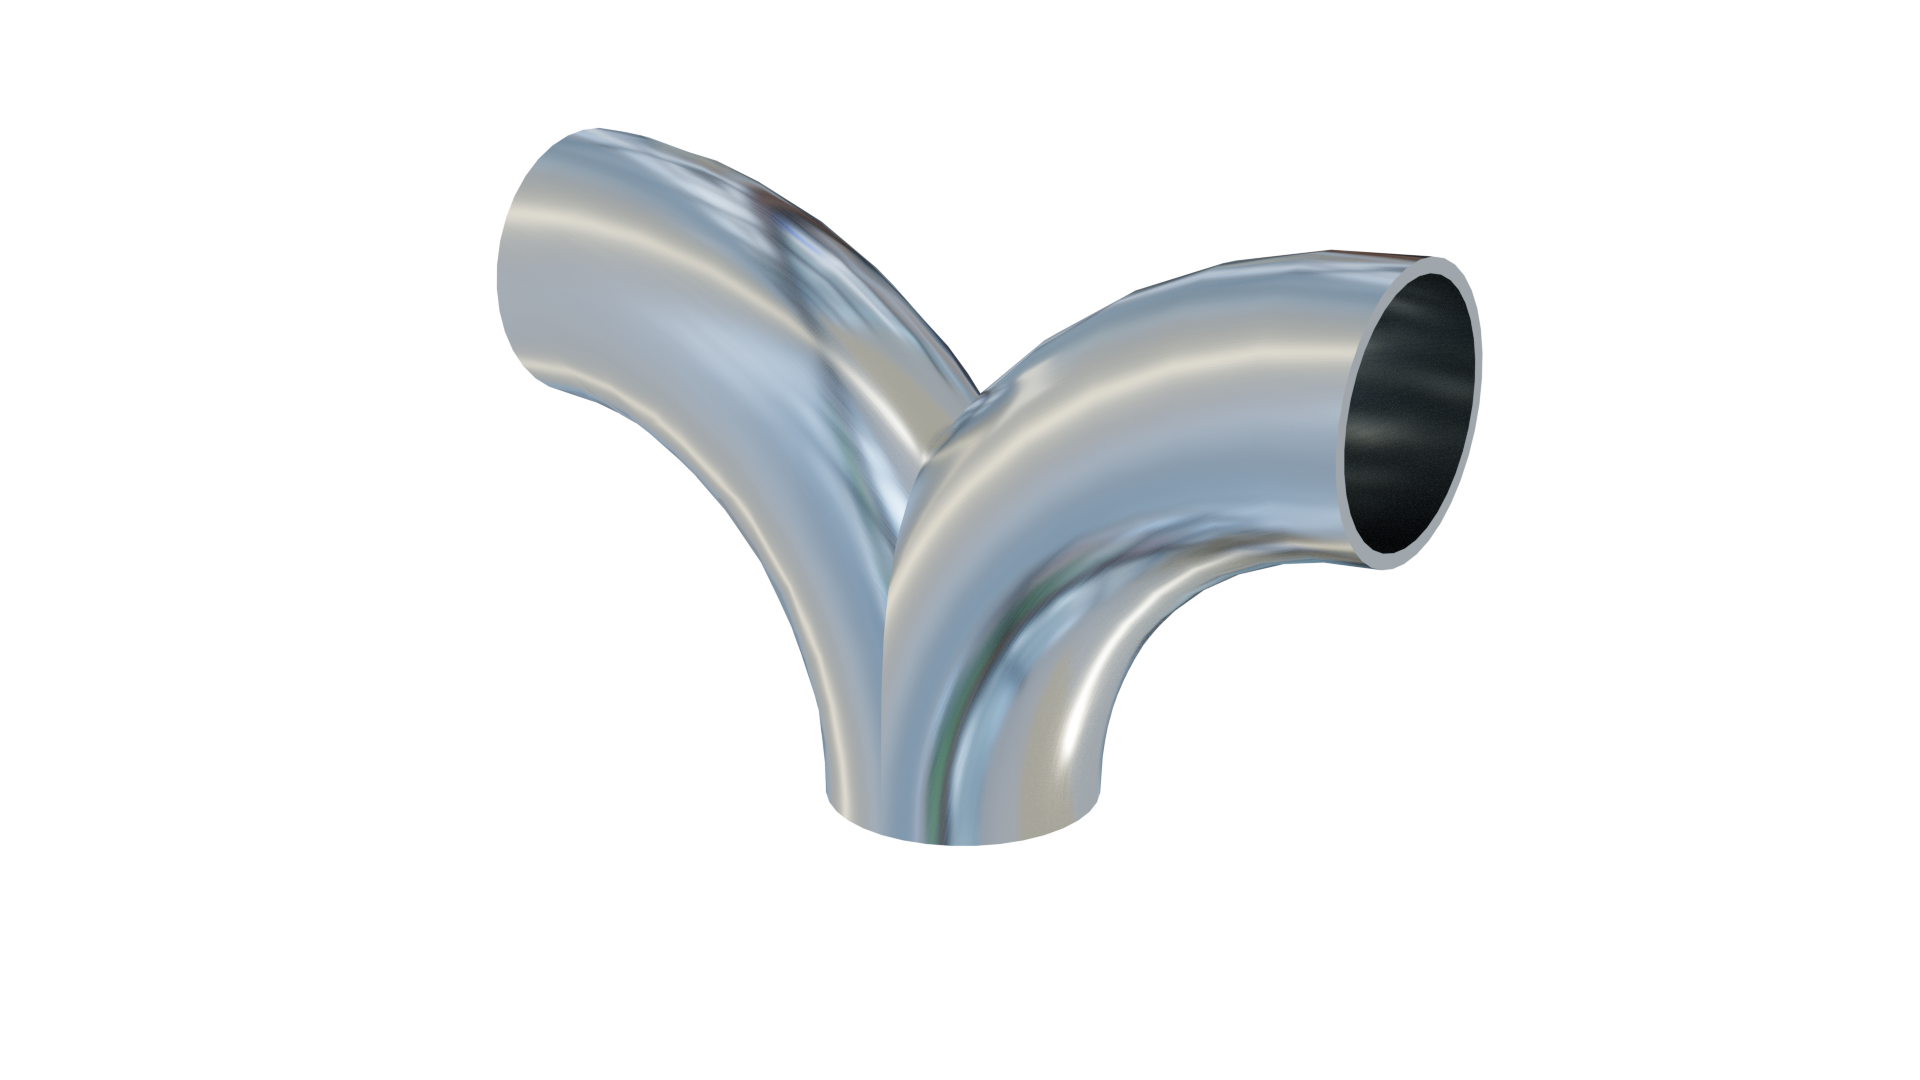 Double Tee bend 3" 316L polished